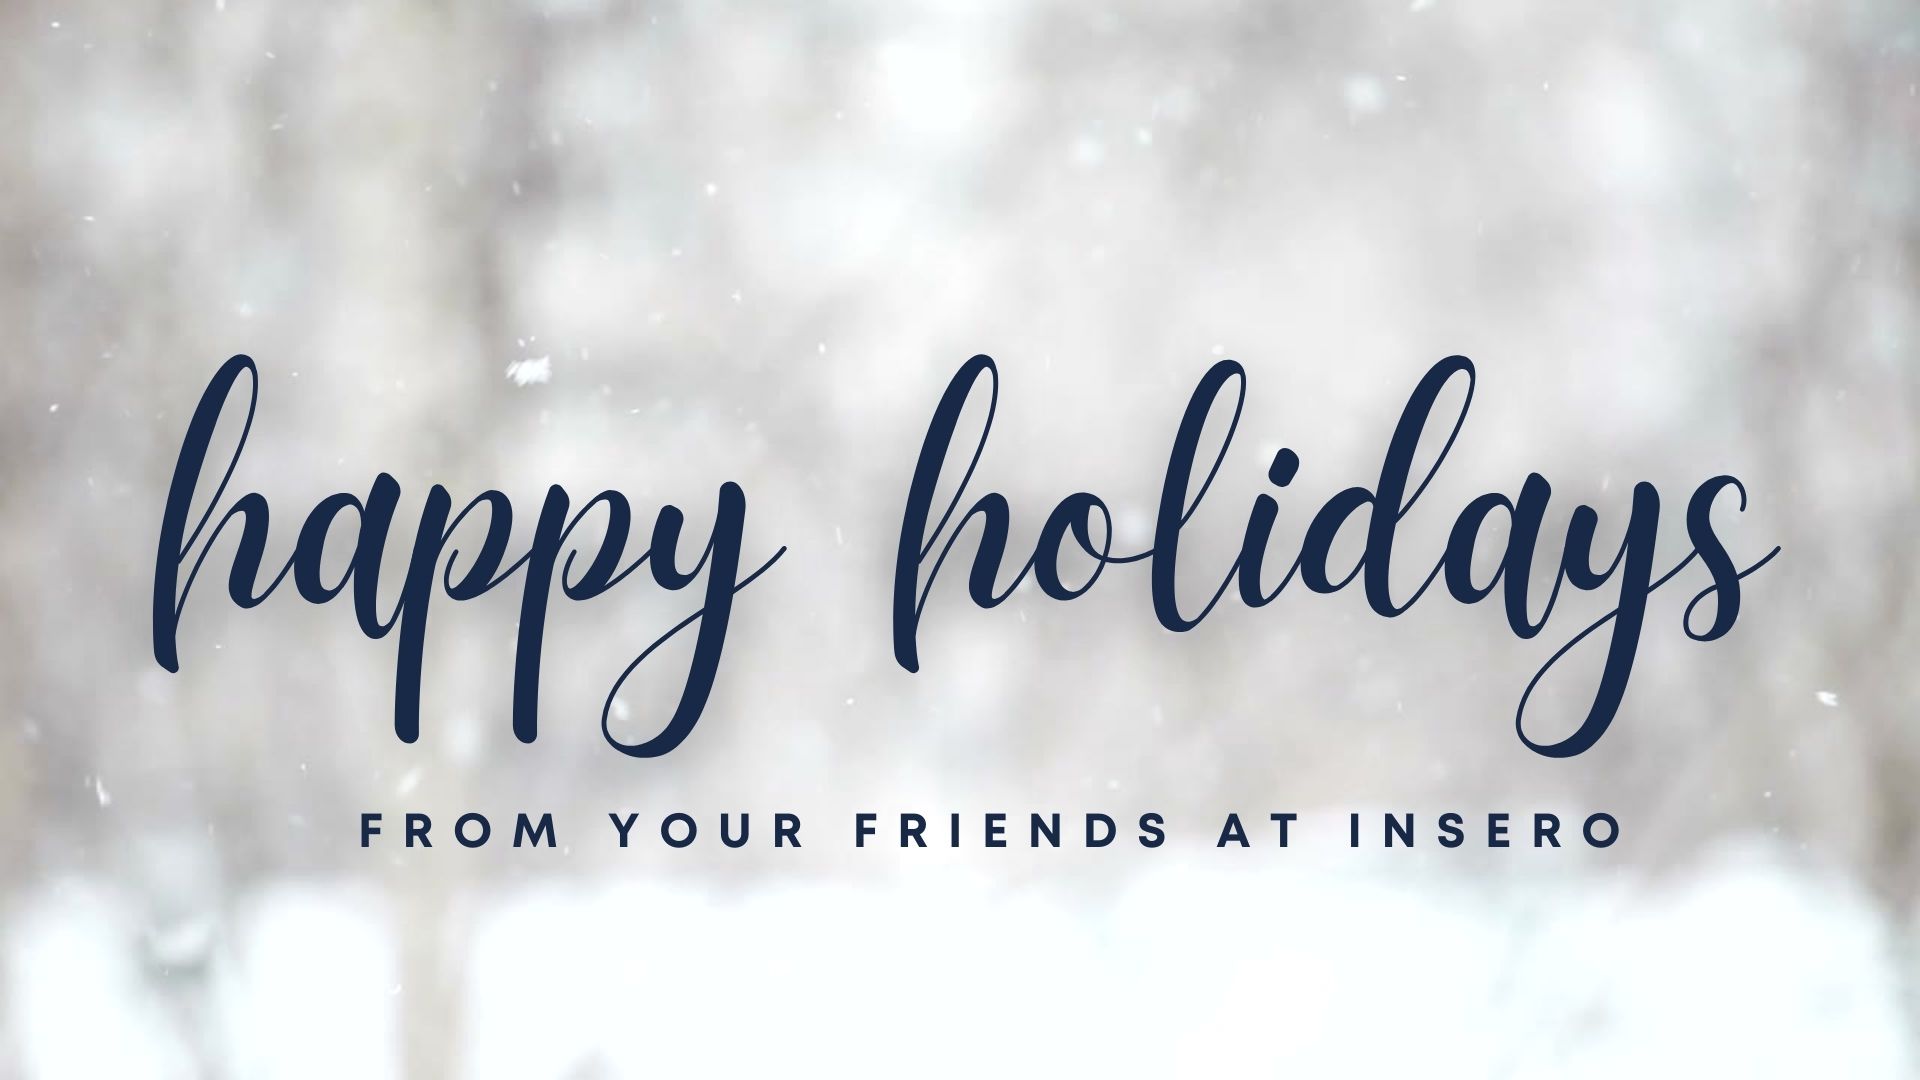 Happy holidays from your friends at Insero